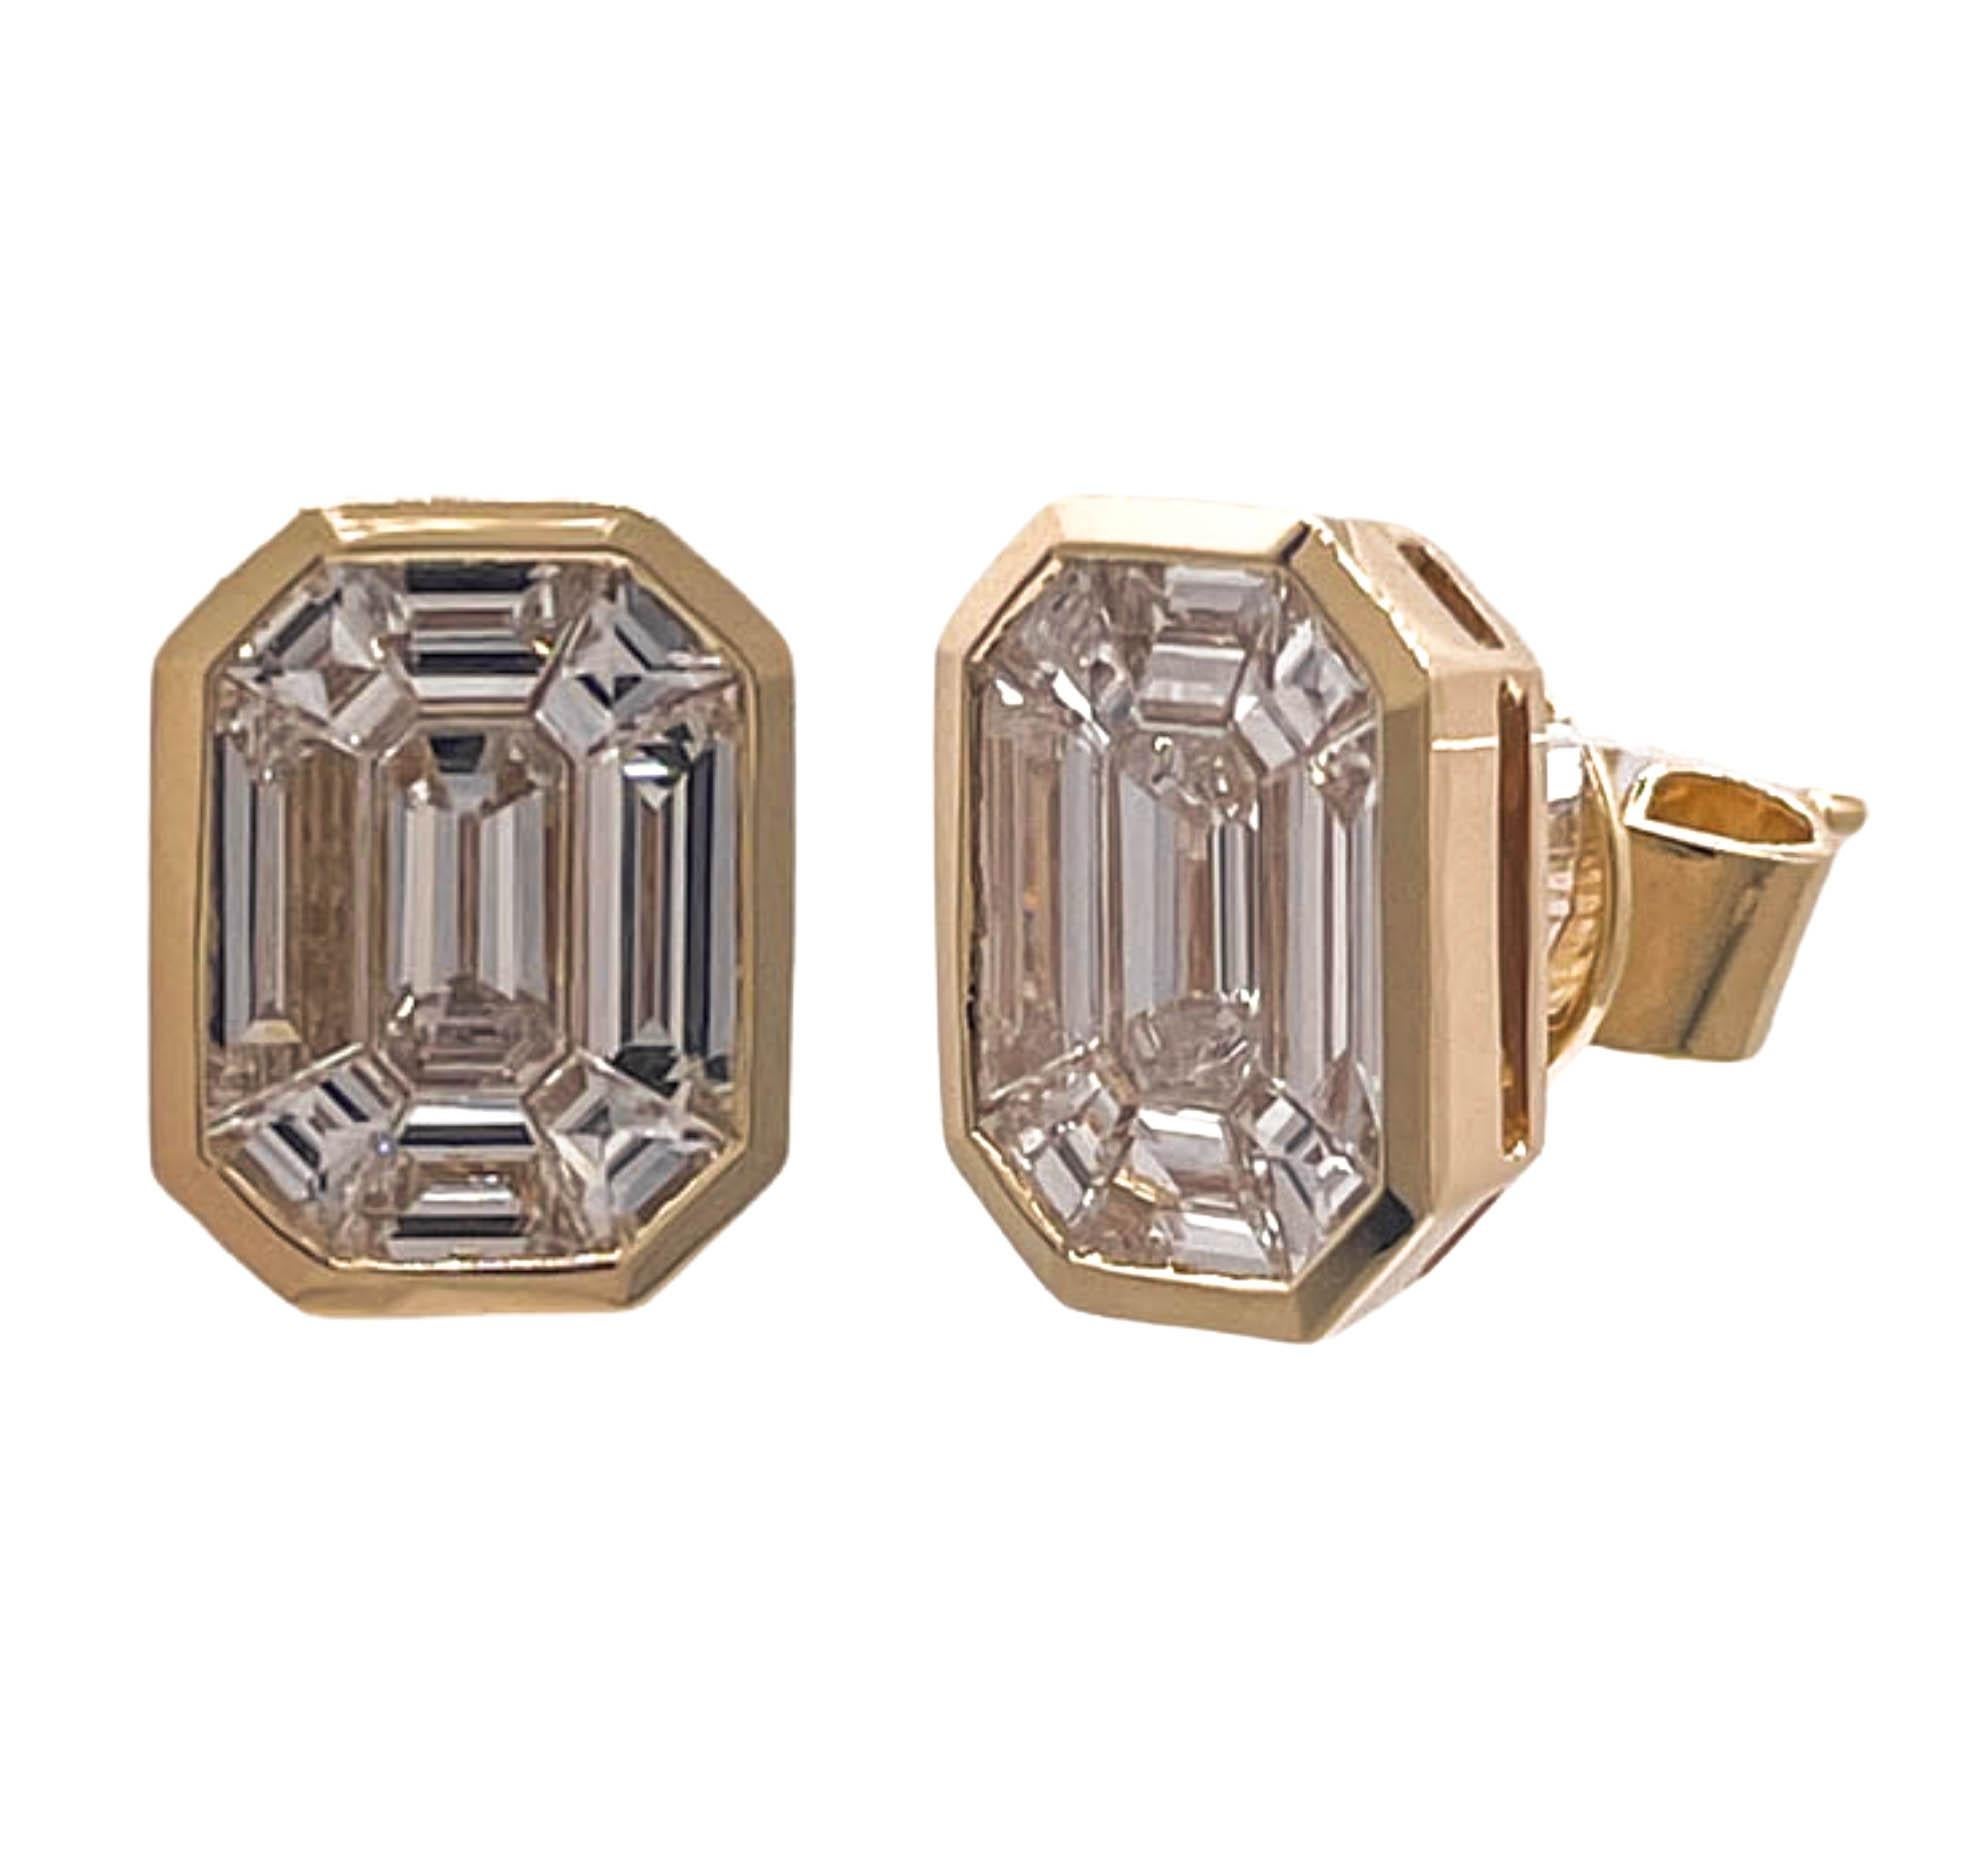 Jay Feder 18k Yellow Gold Invisible set Emerald cut Diamond Stud Earrings

There are 18 step cut diamonds; total carat weight is 1.57ctw. 

The earrings measurements are 10.34x8.14mm. Total weight is 3.6 grams. 

Please view our photos and videos